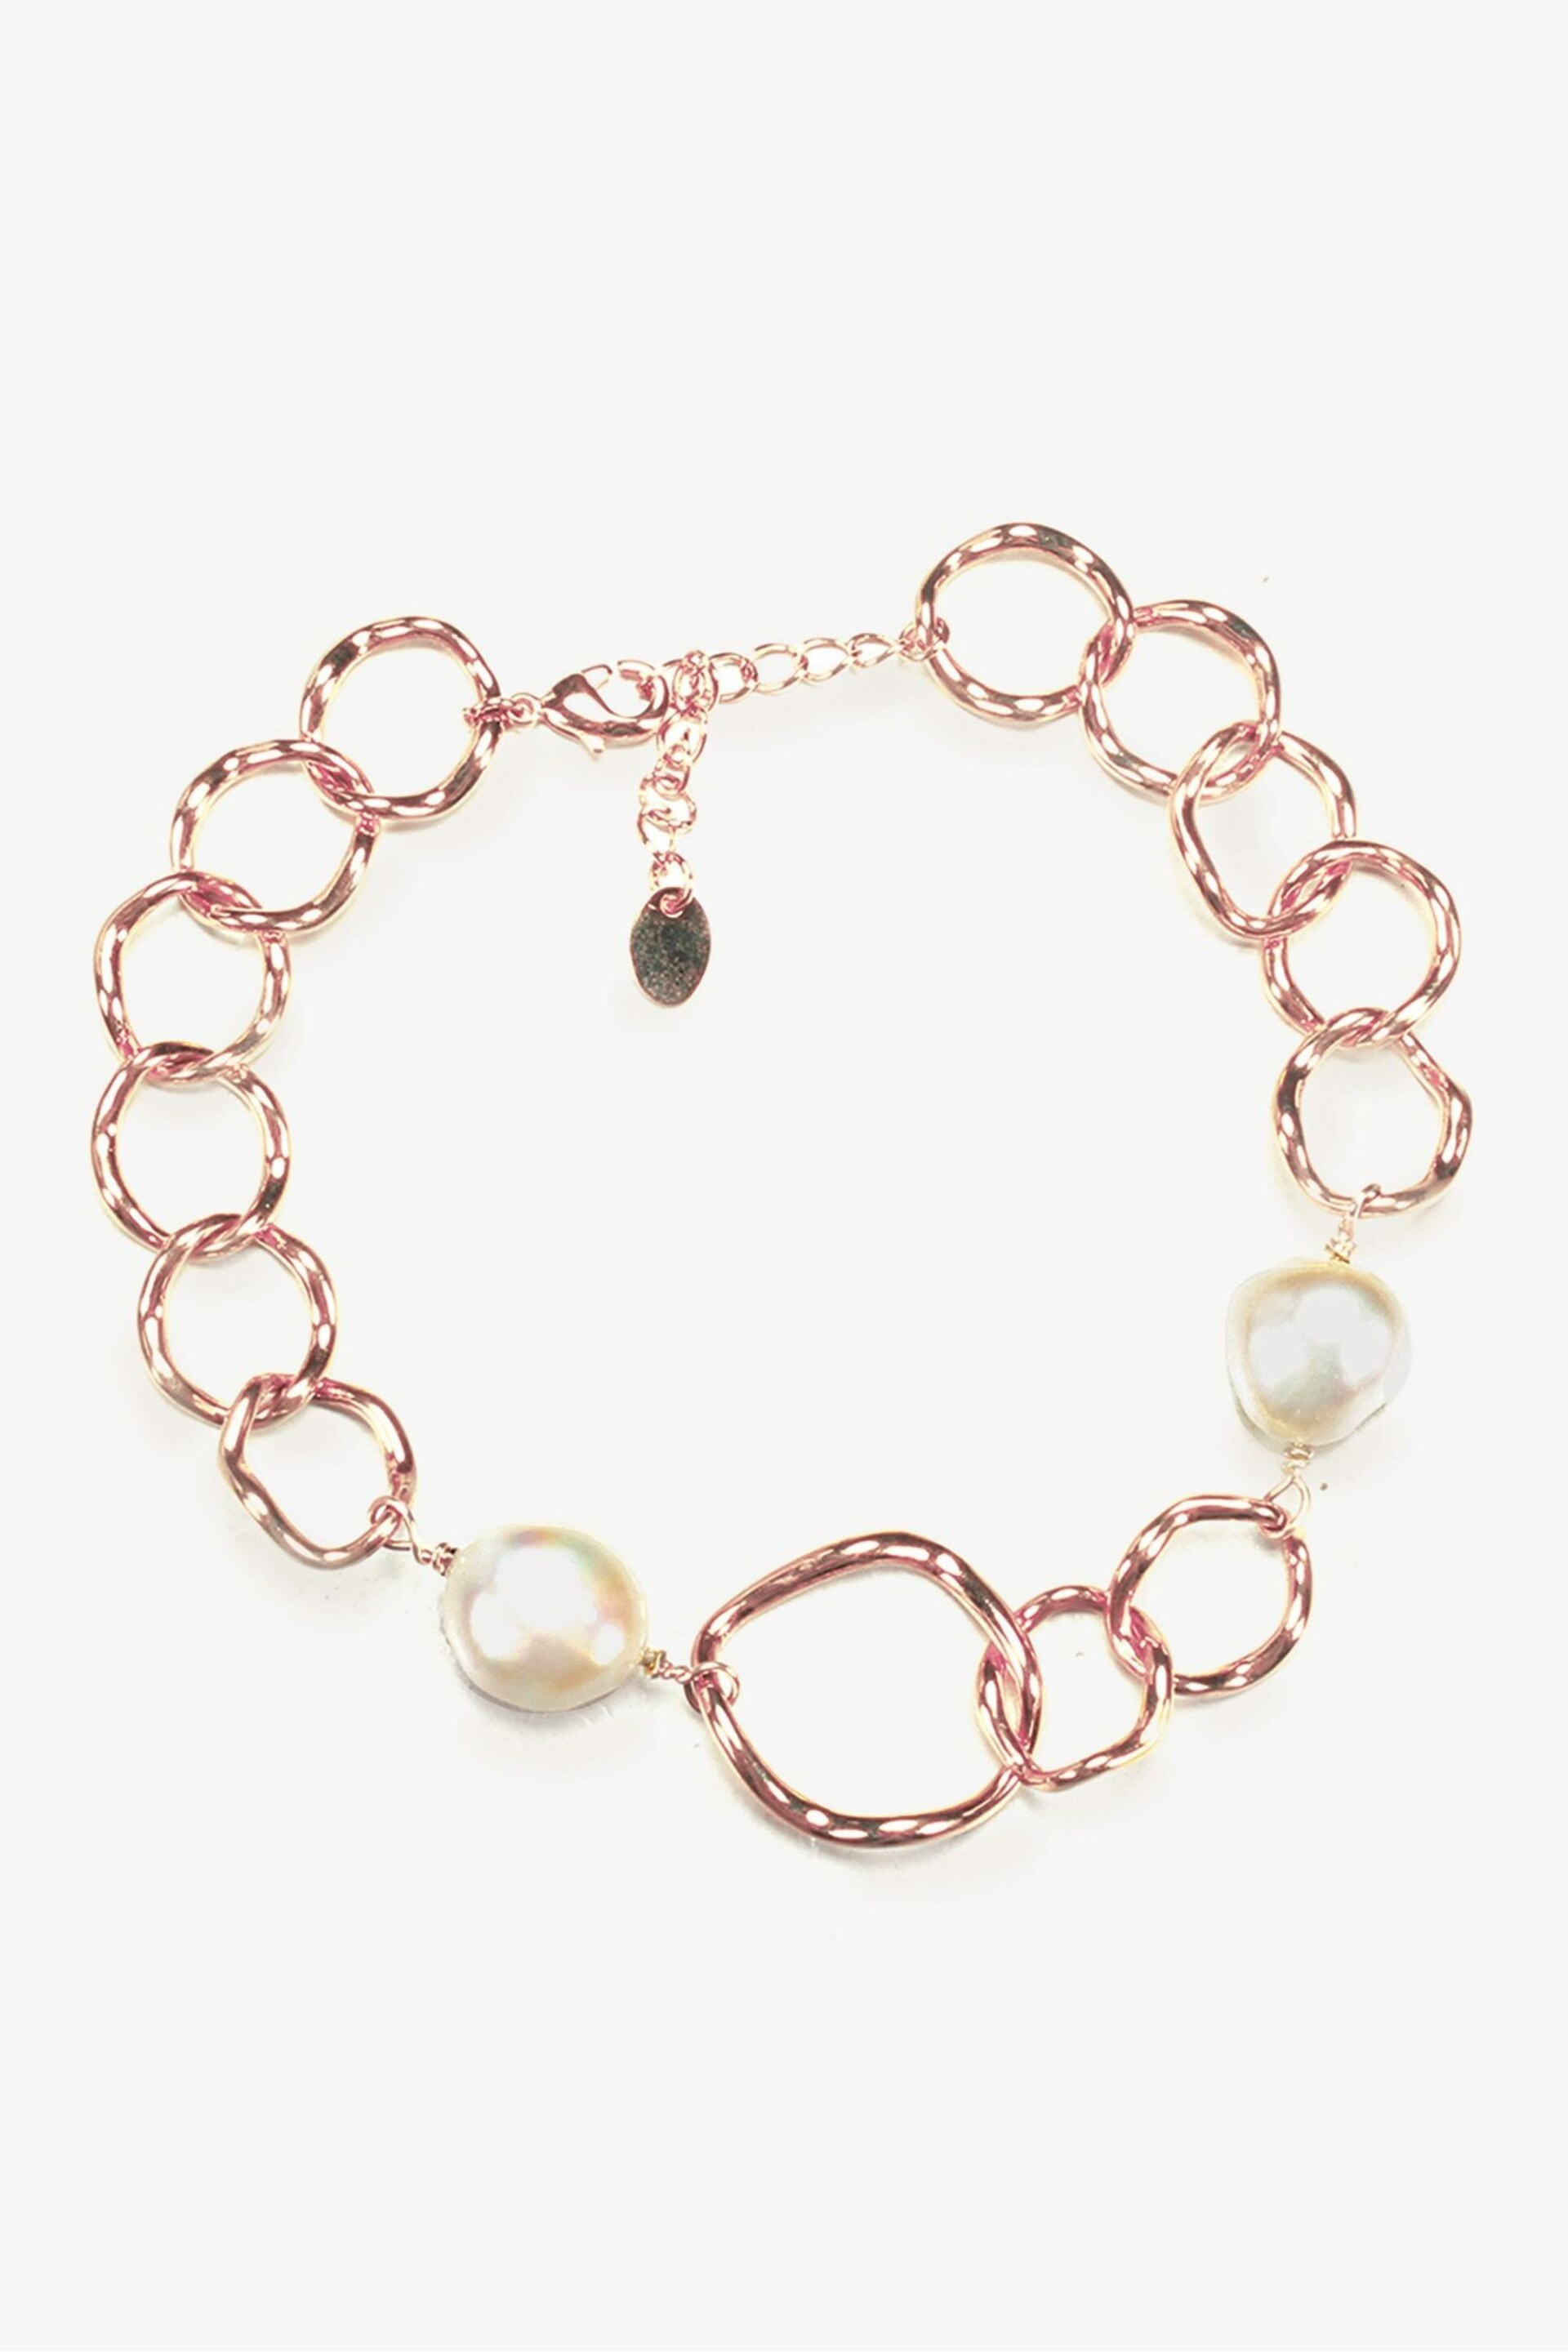 Ivory & Co Rose Gold Caprice And Pearl Hoop Bracelet - Image 1 of 4